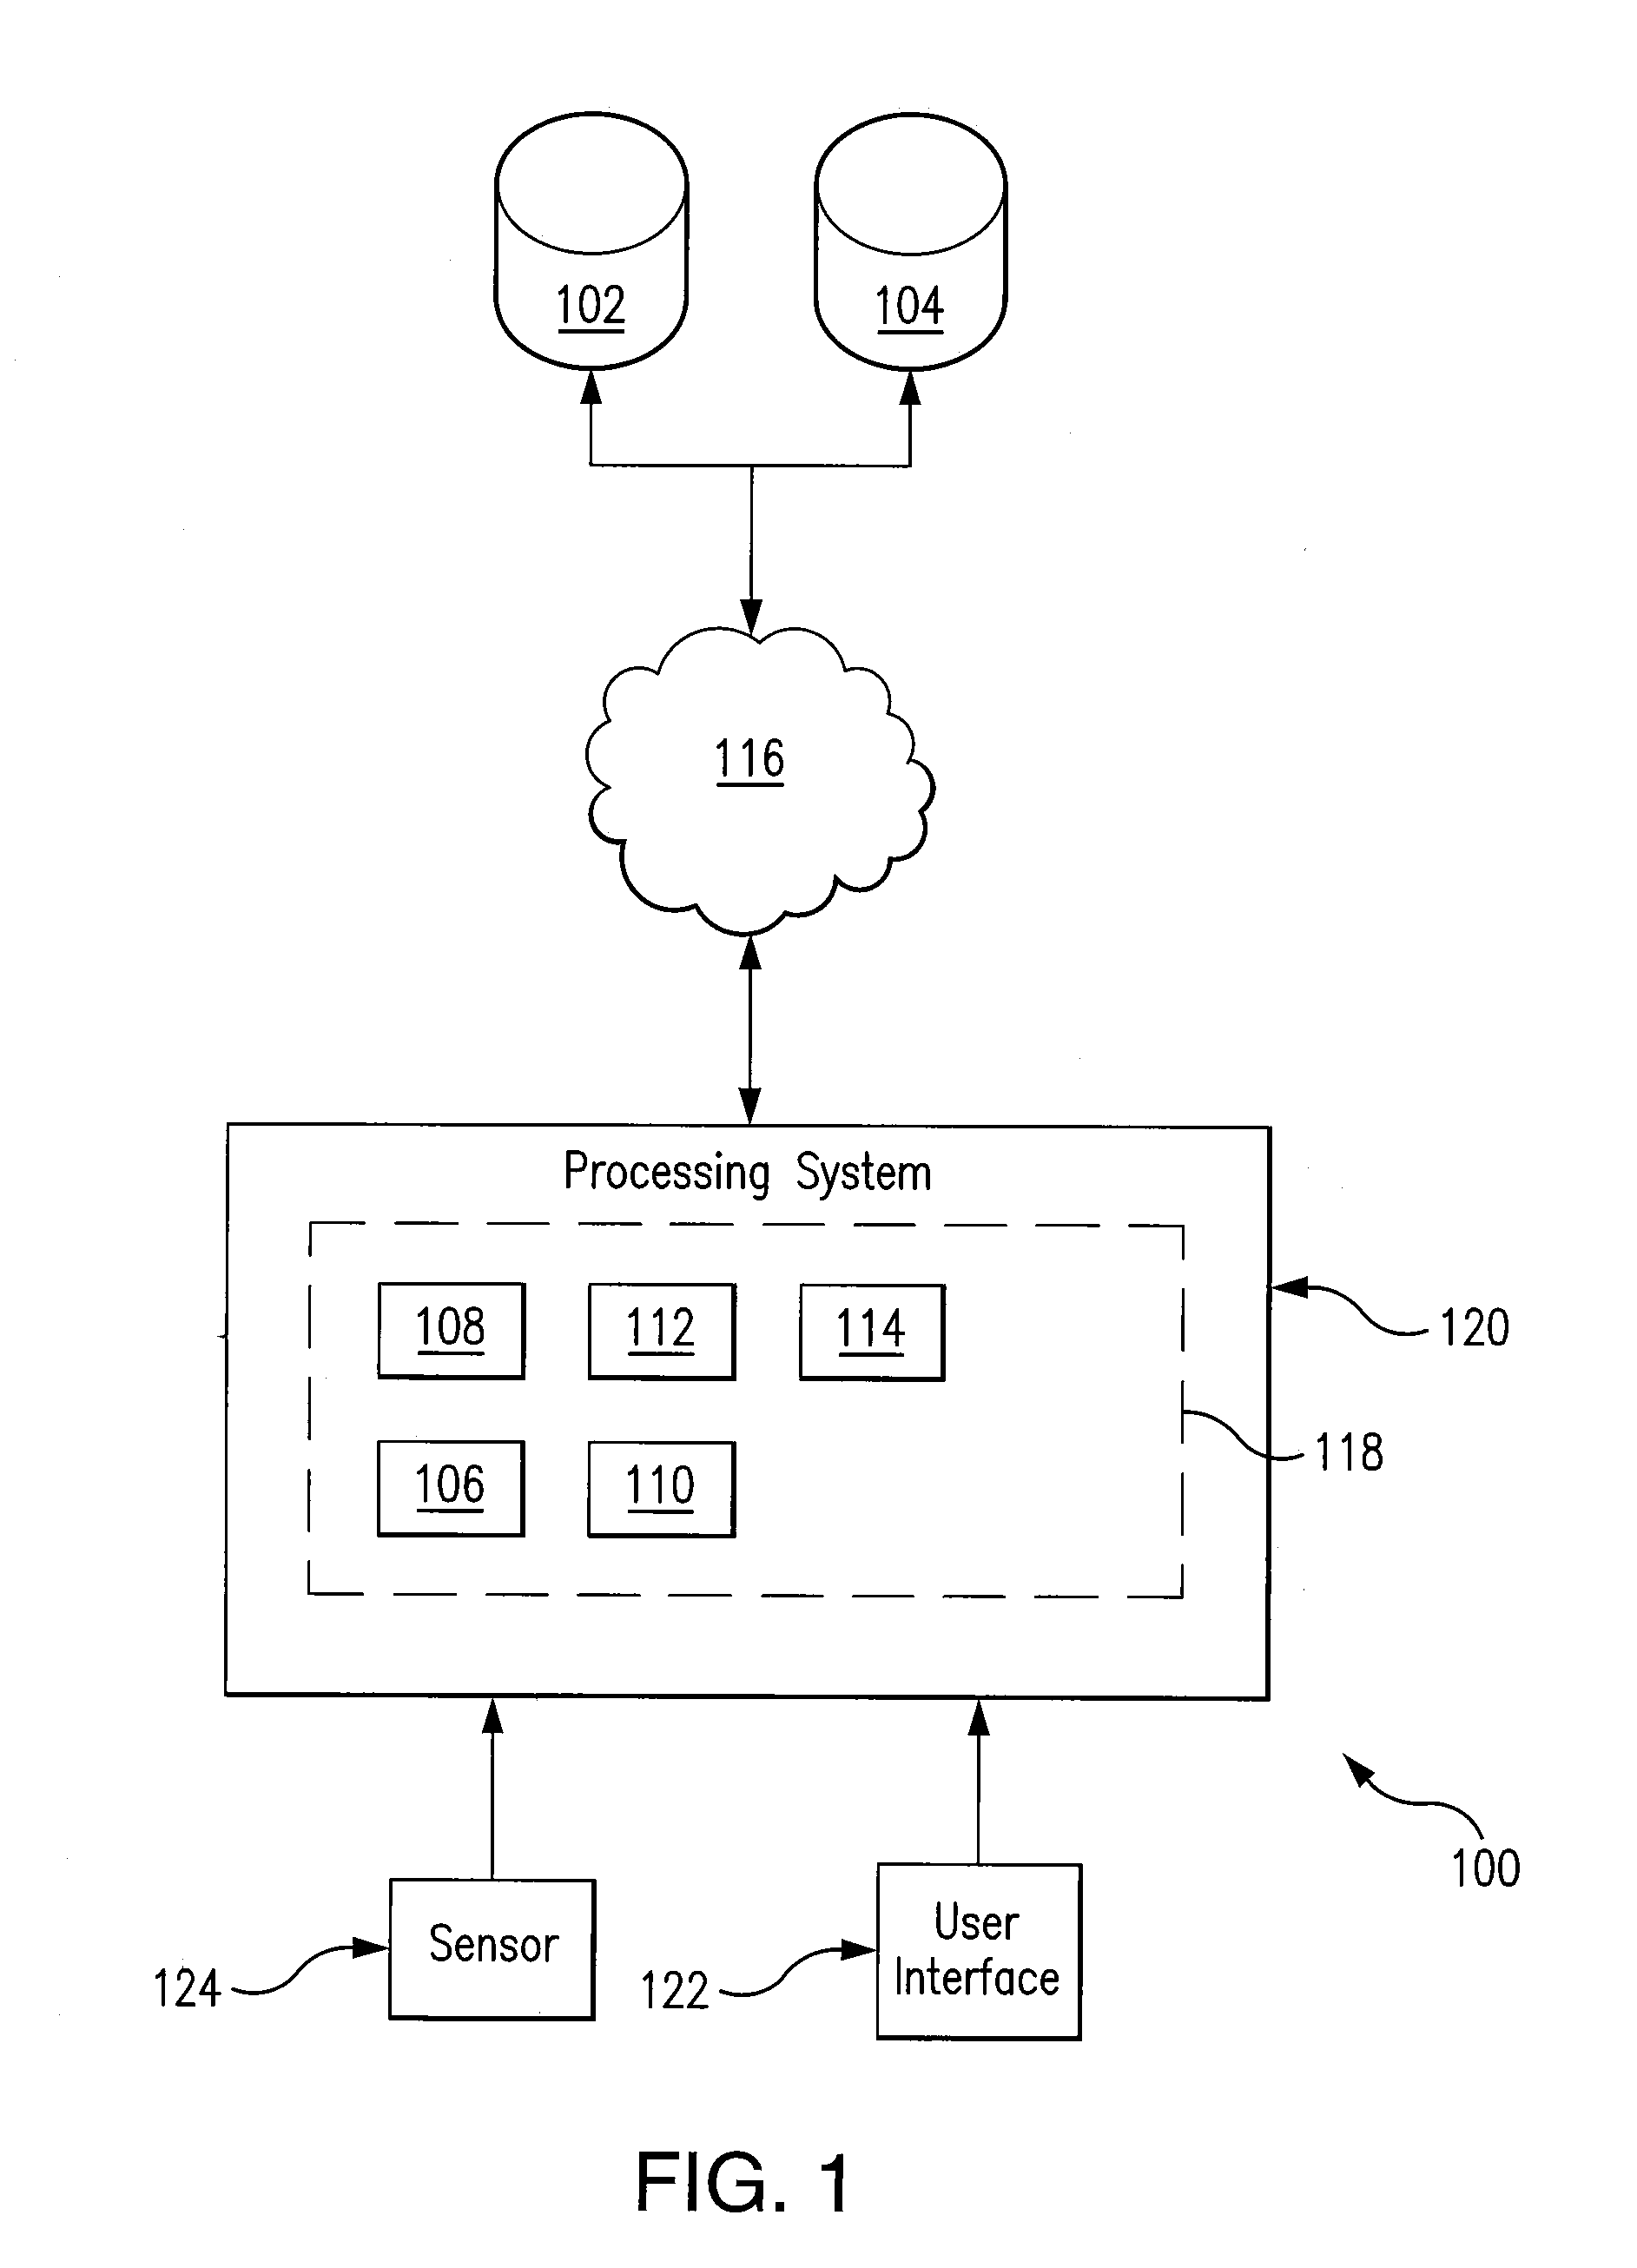 System and Method for Biometric Identification using Ultraviolet (UV) Image Data